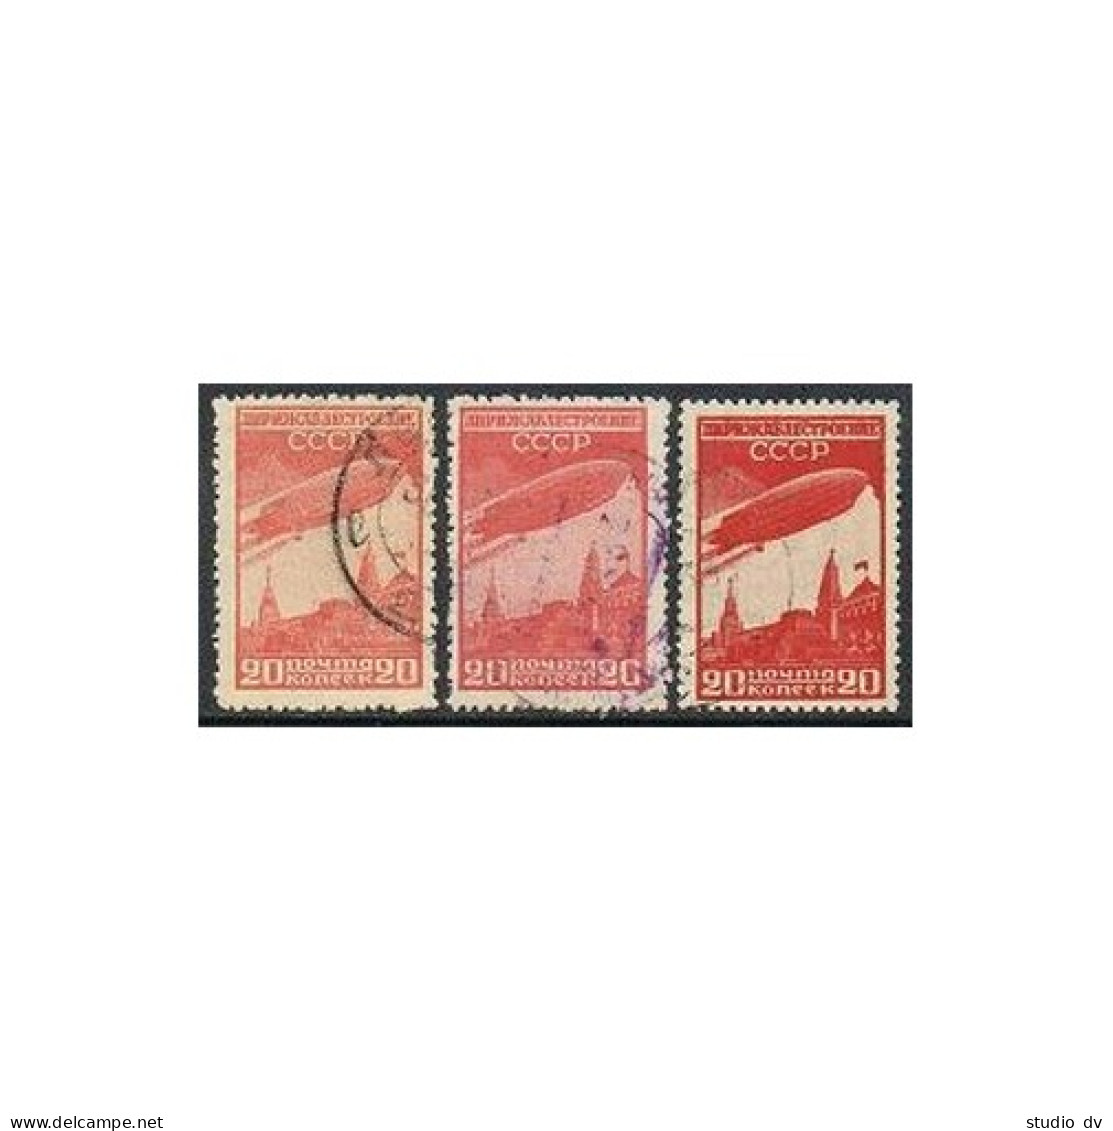 Russia C22 K12.5x12 3 Colors, CTO. Mi 399D. Airships Over Lenin Mausoleum, 1930. - Used Stamps